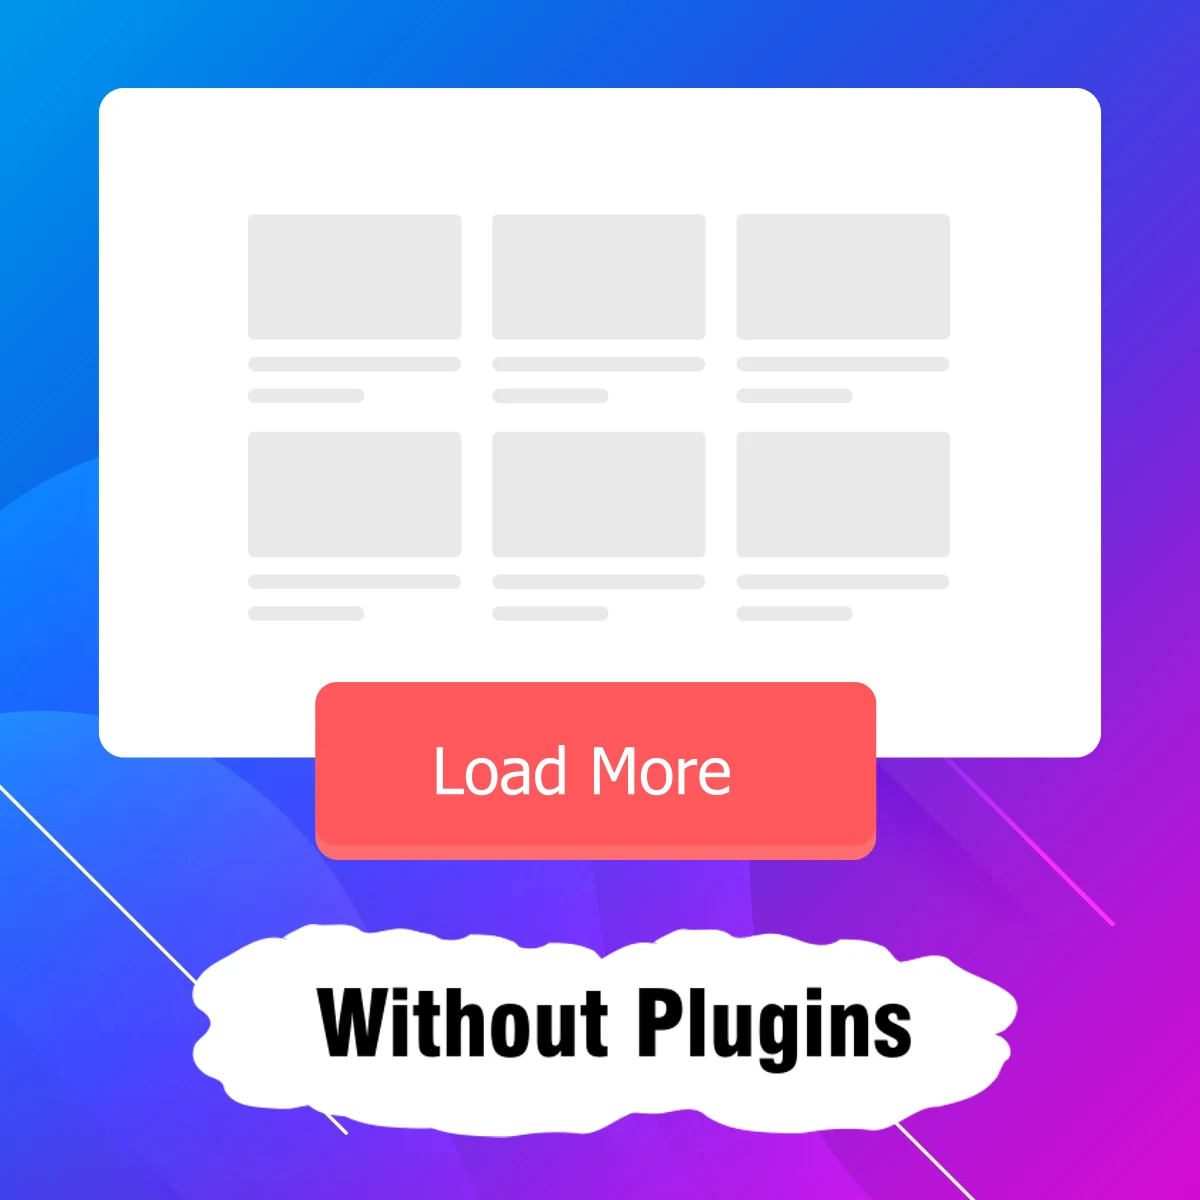 add load more button in wordpress whithout plugins